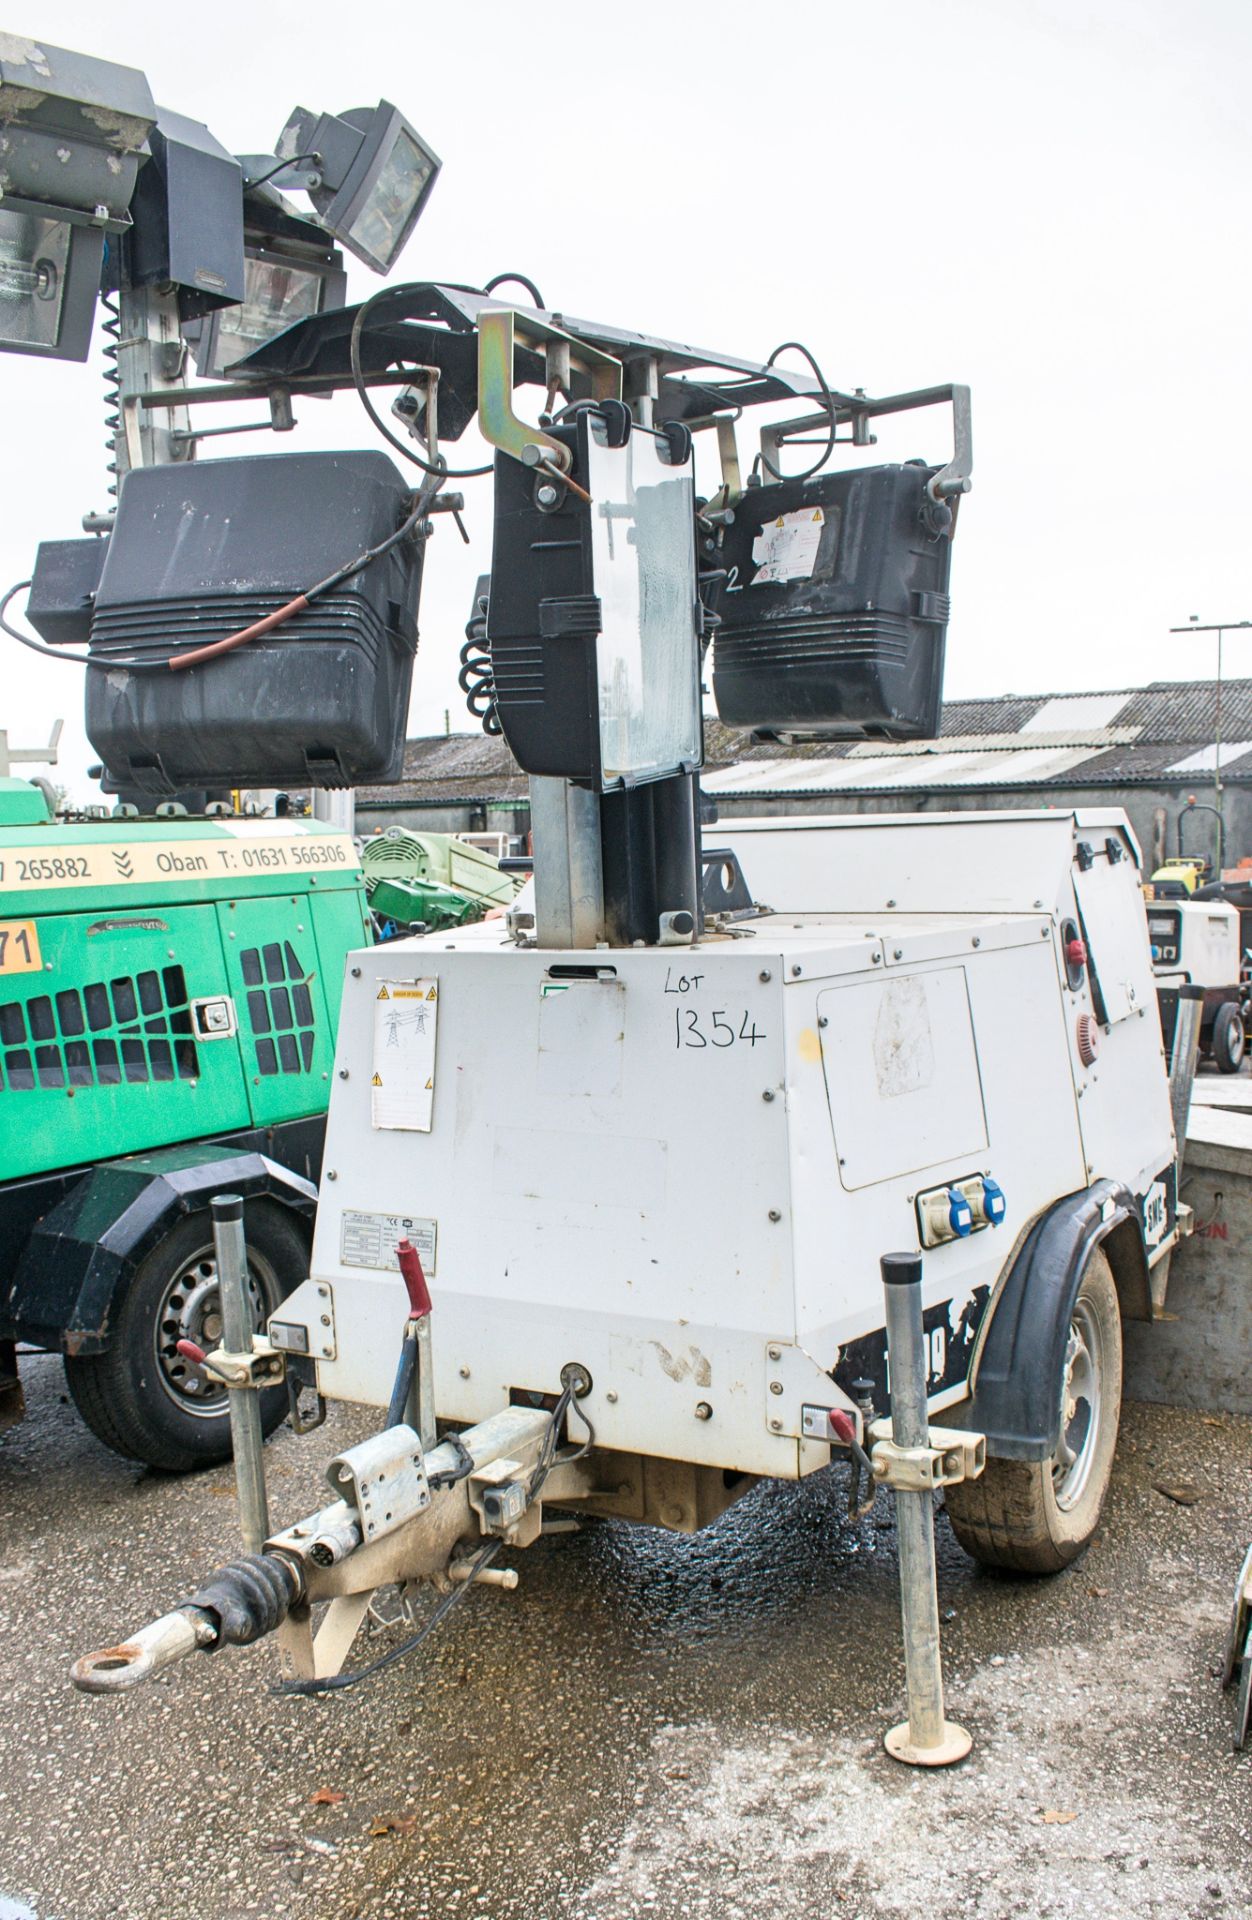 SMC TL-90 diesel driven mobile lighting tower Year: 2011 S/N: 118871 Recorded Hours: 4372 A660410